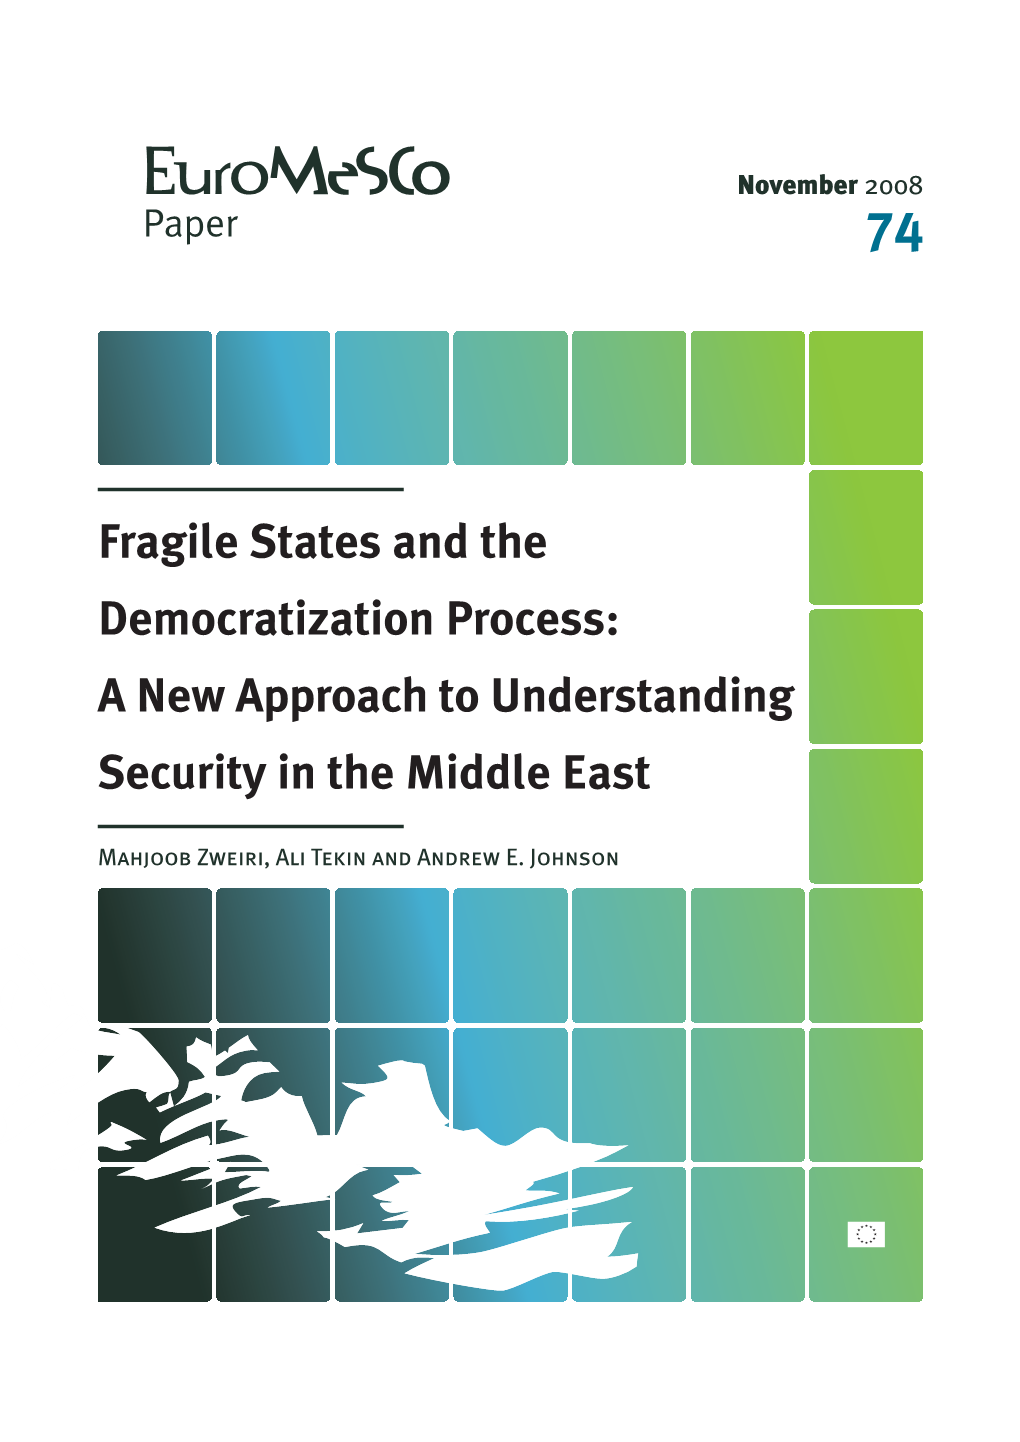 Fragile States and the Democratization Process: a New Approach to Understanding Security in the Middle East